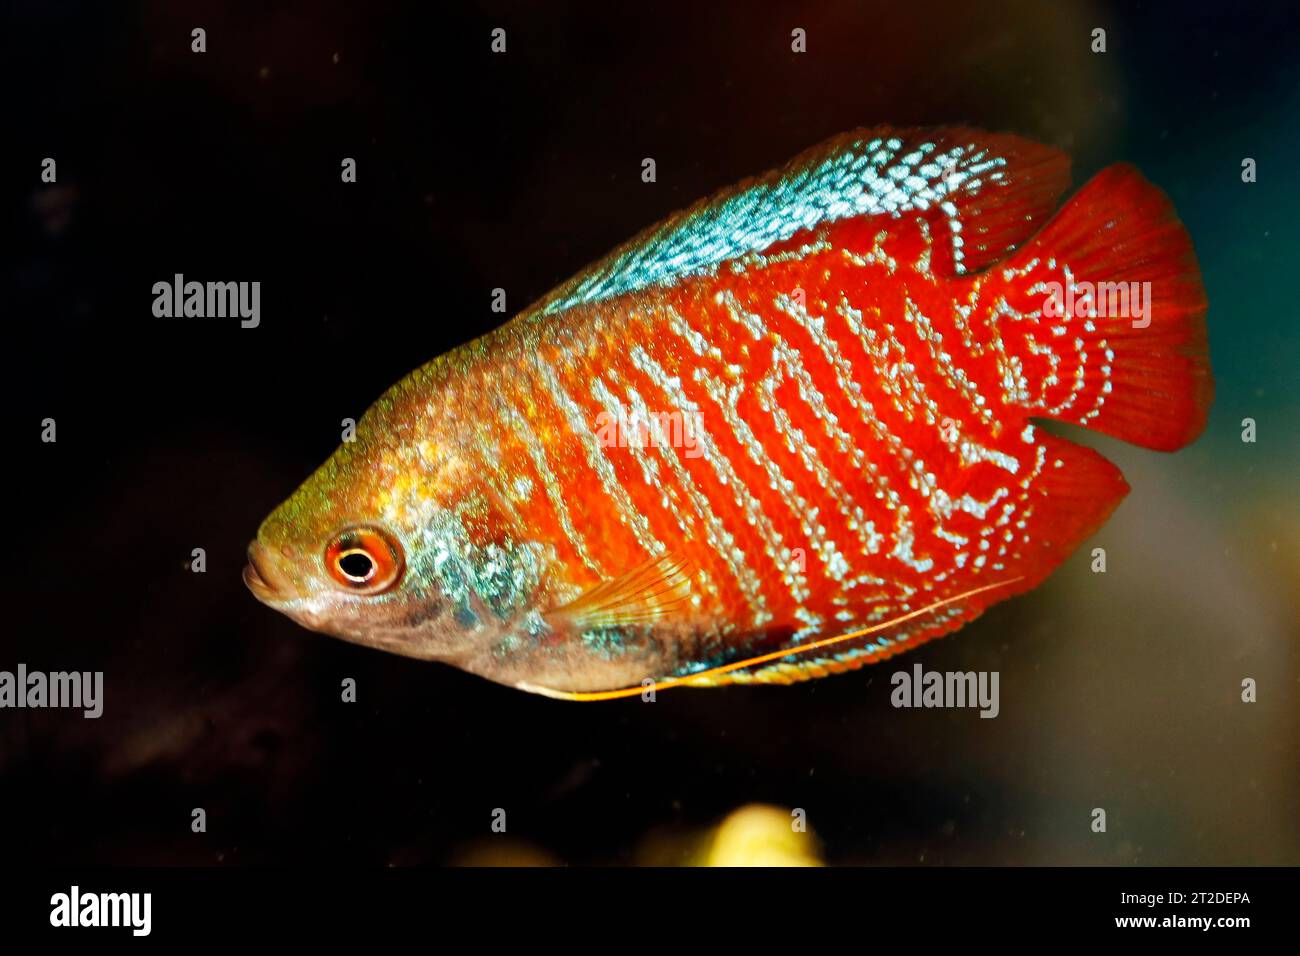 dwarf gourami, or gouramies, are a group of freshwater anabantiform fish that comprise the family Osphronemidae. Stock Photo